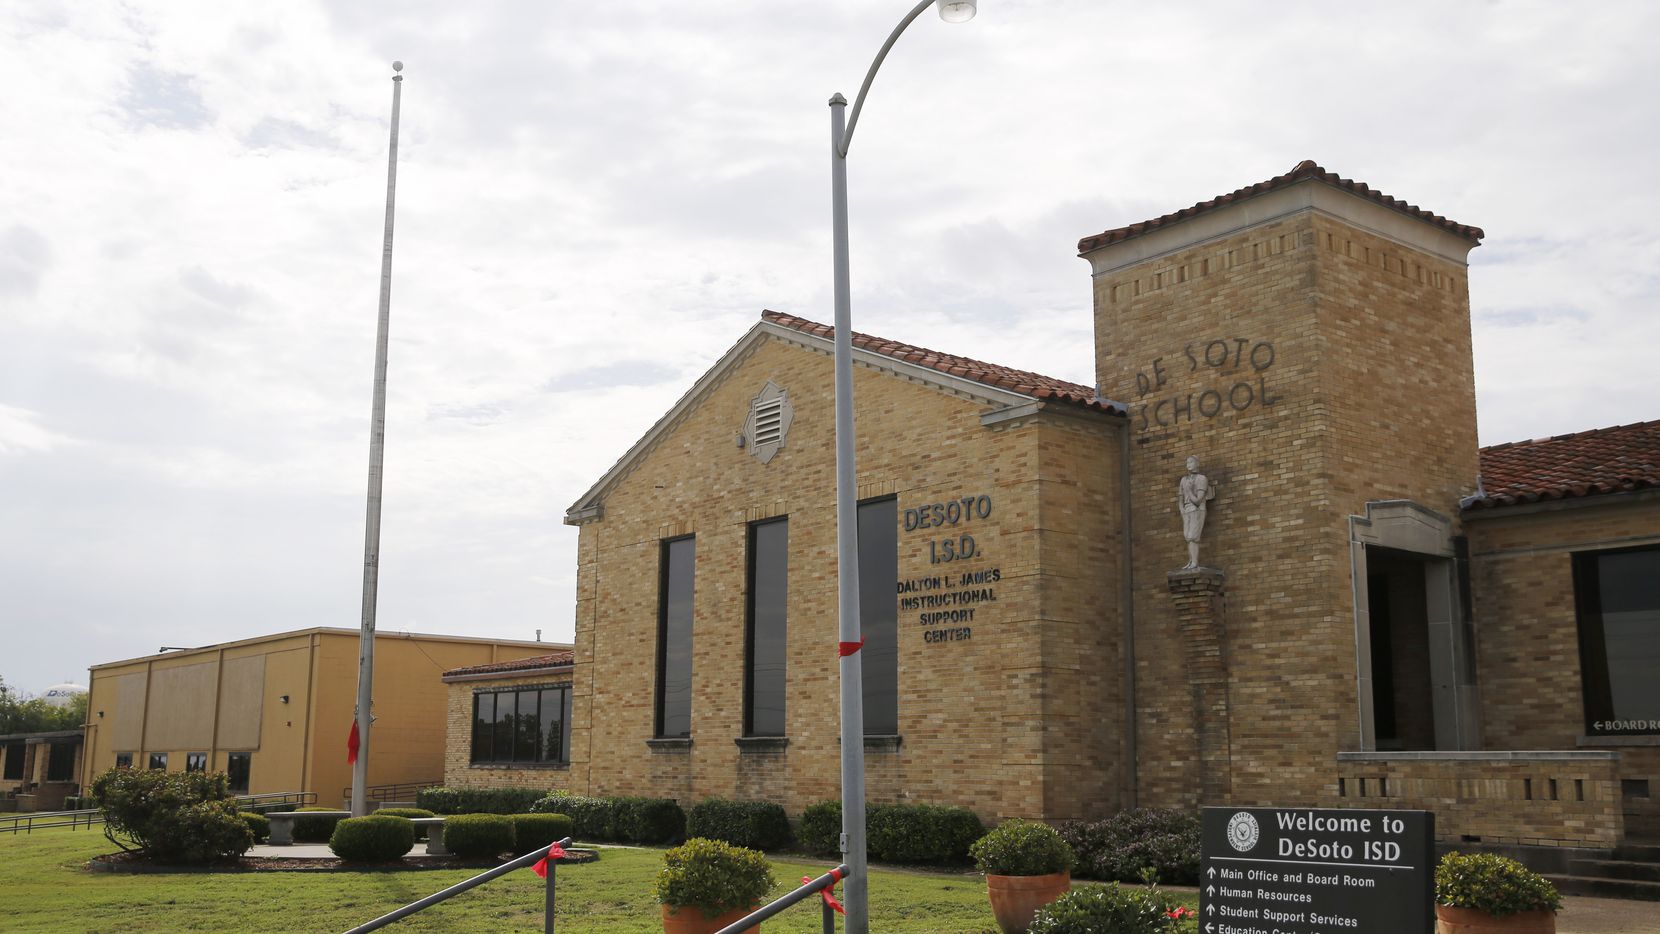 The DeSoto ISD administration building is pictured here in DeSoto, Texas.